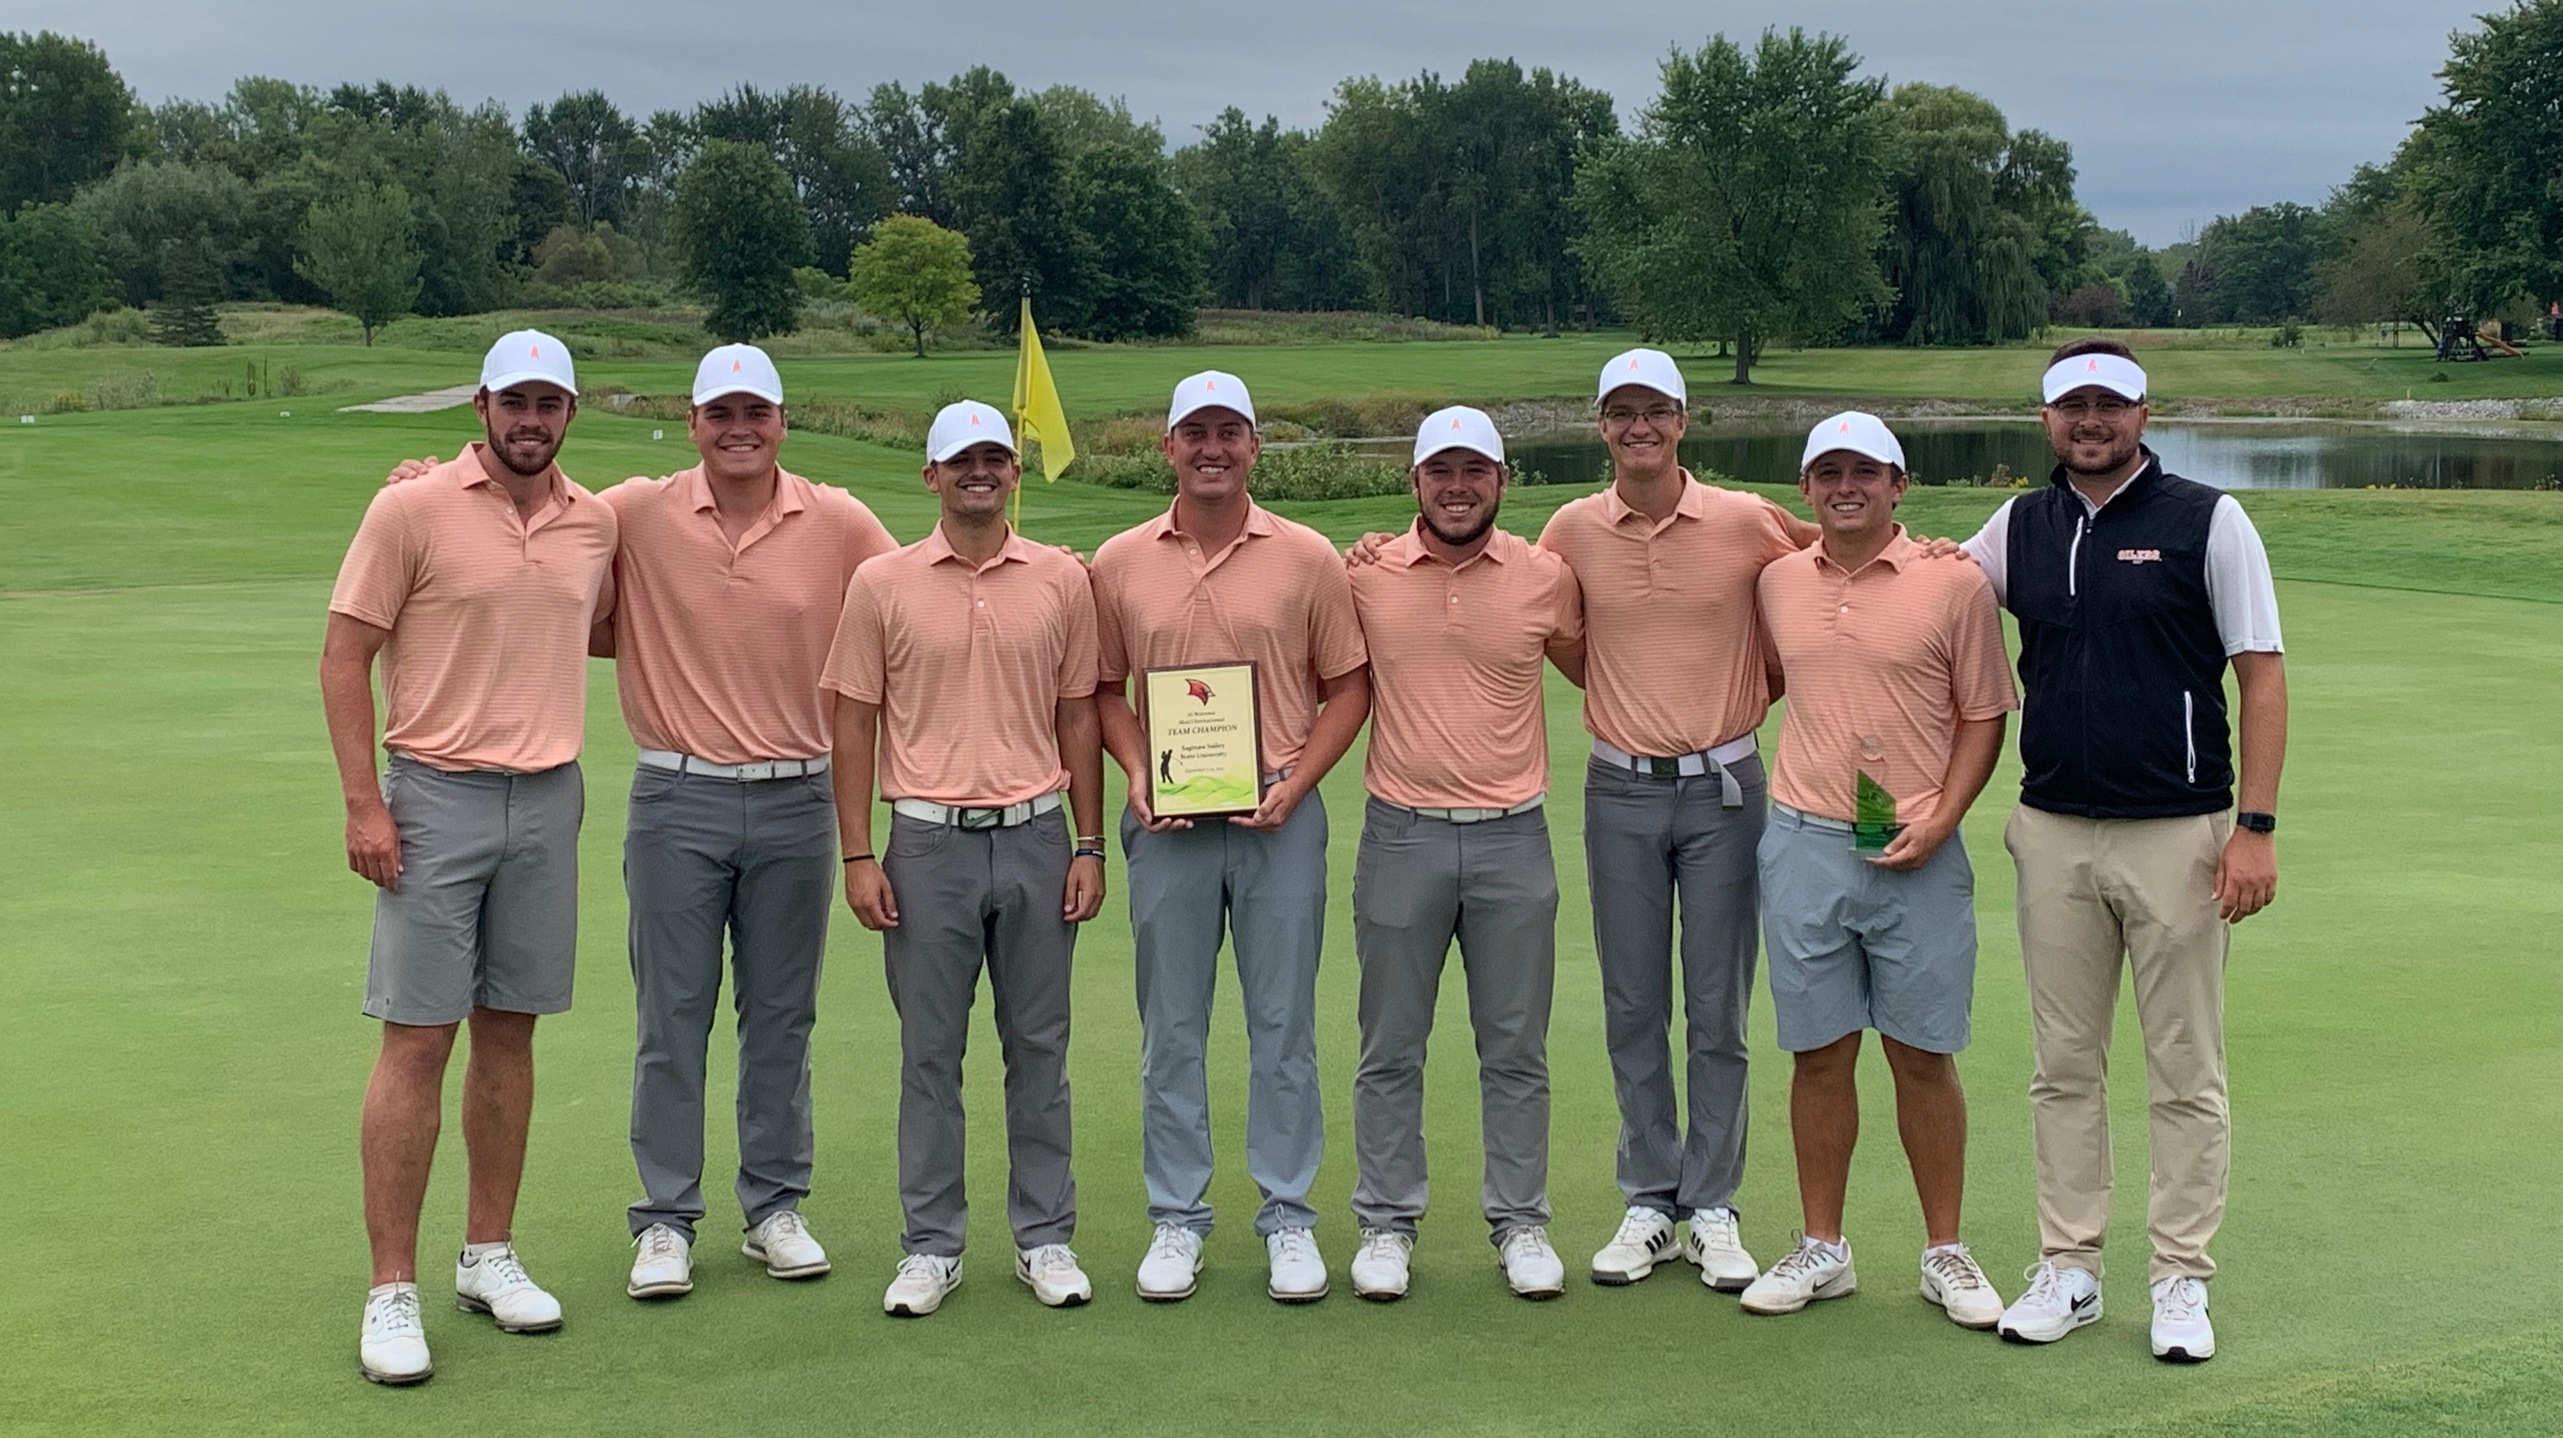 Mens golf team poses with trophy.